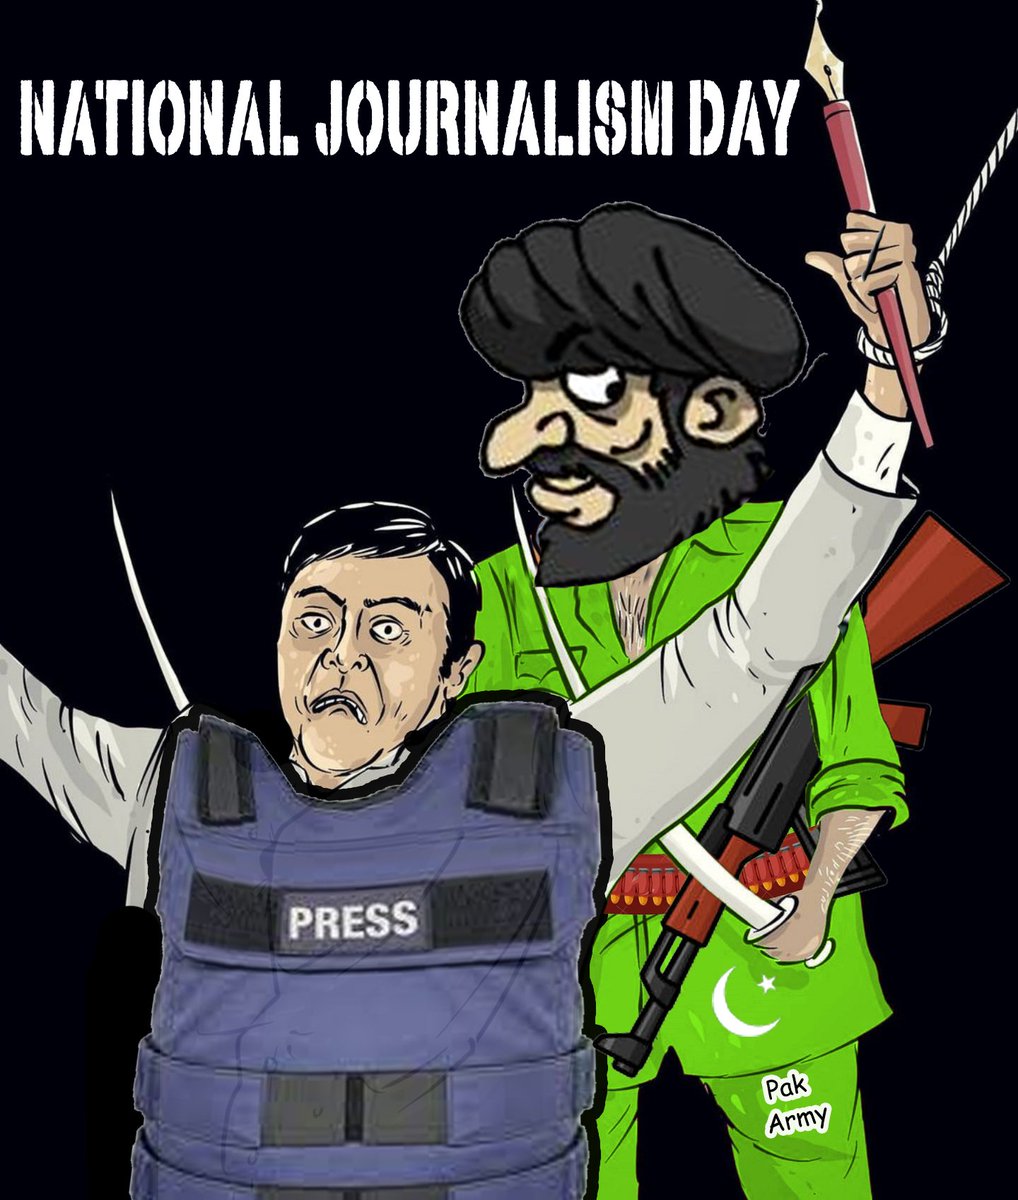 Pakistani press mirroring Pak army's narrative compromises press freedom and accountability. A free press is essential for a vibrant democracy. #FreedomOfSpeech #Democracy #PressFreedom